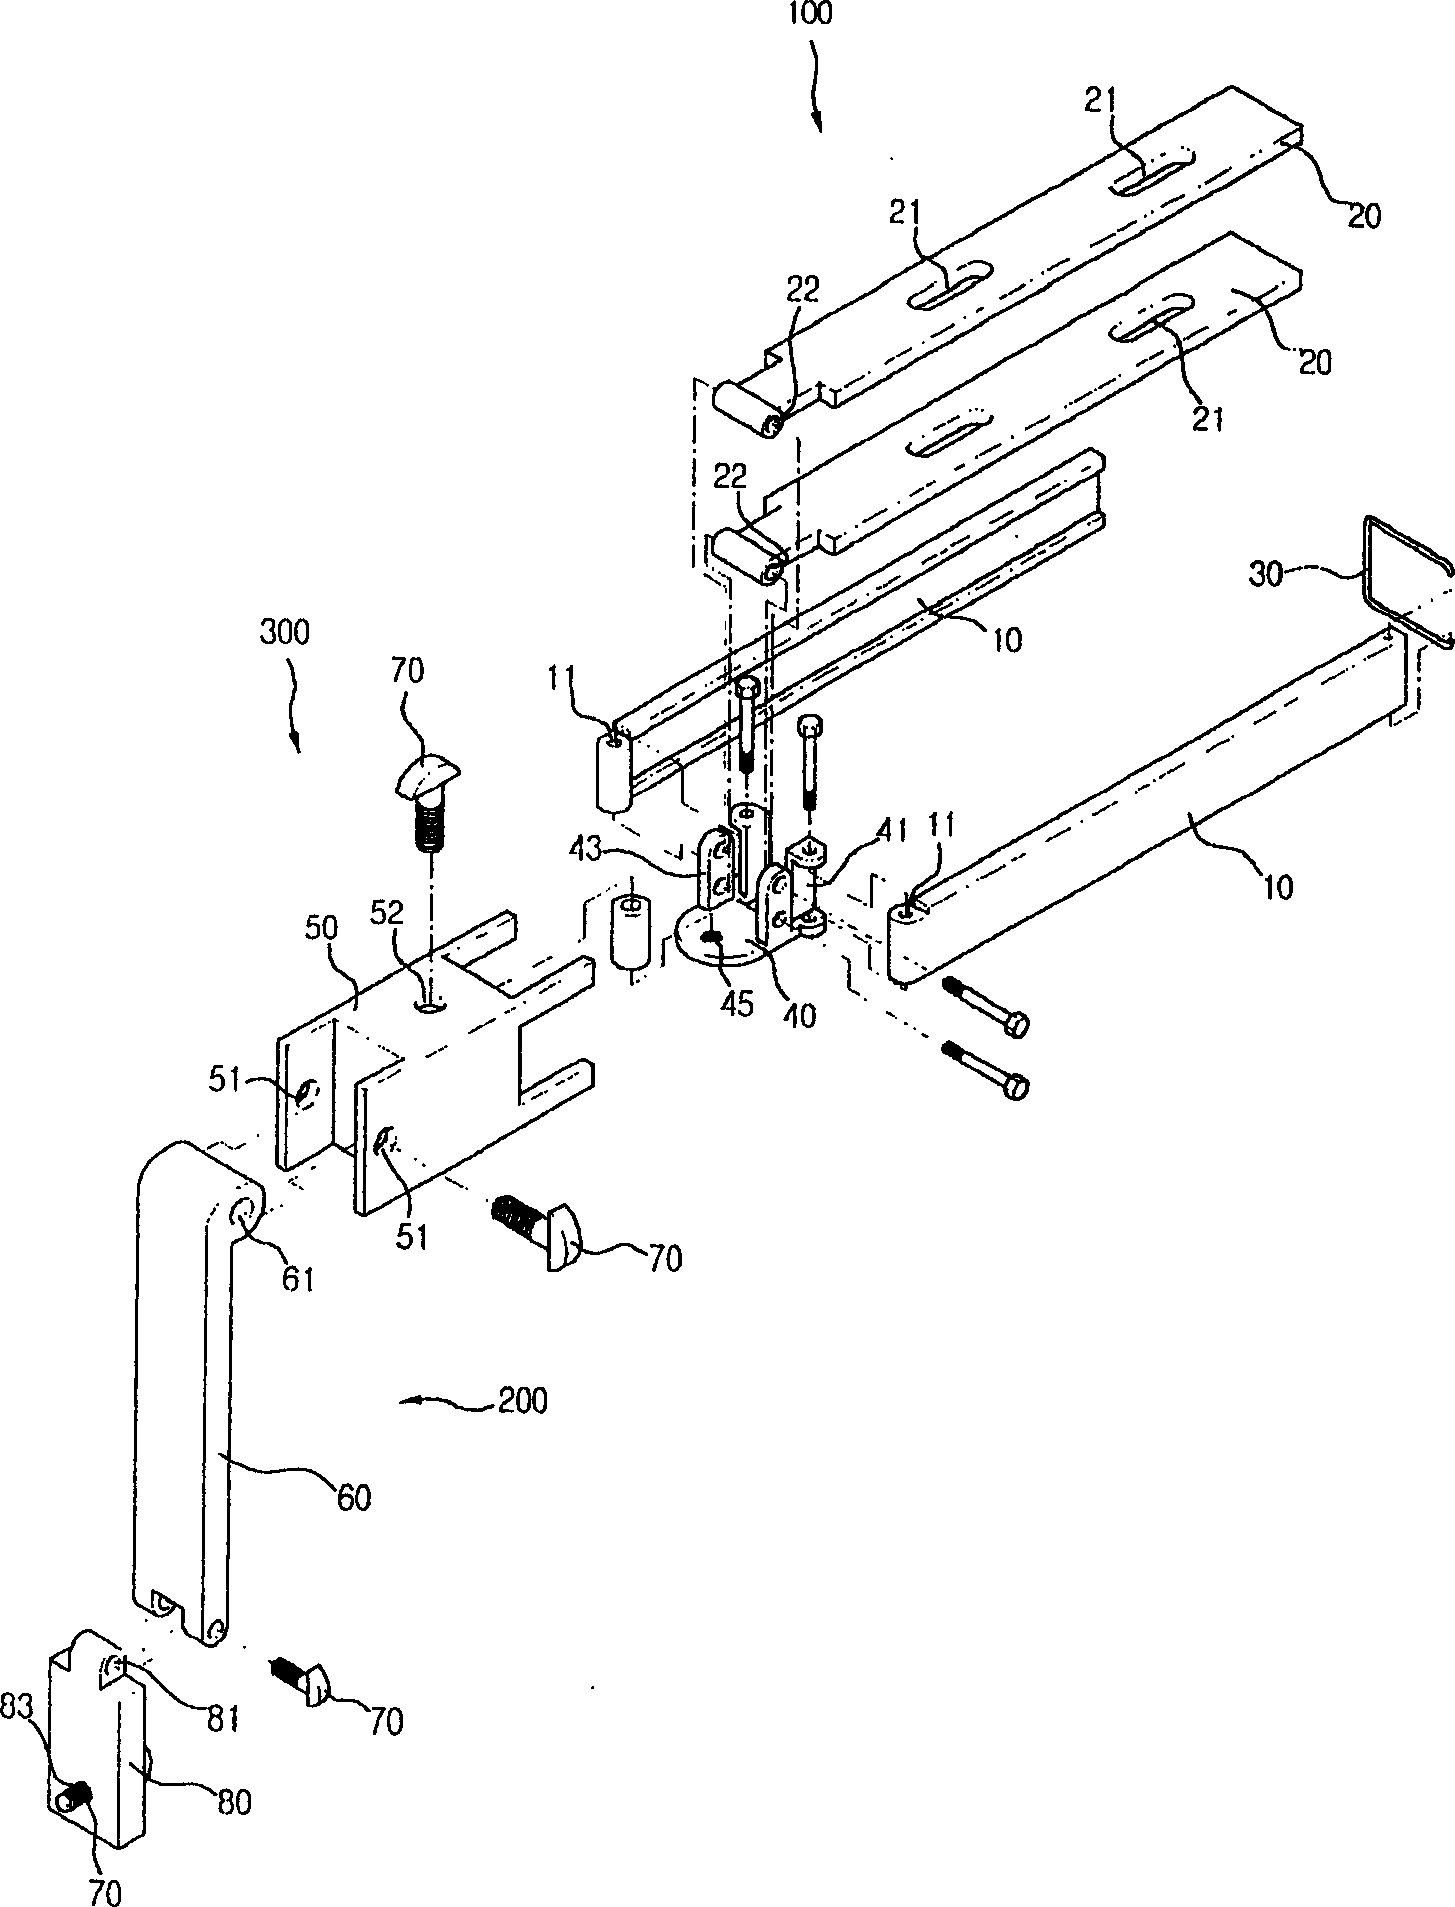 Display device stand for vehicle